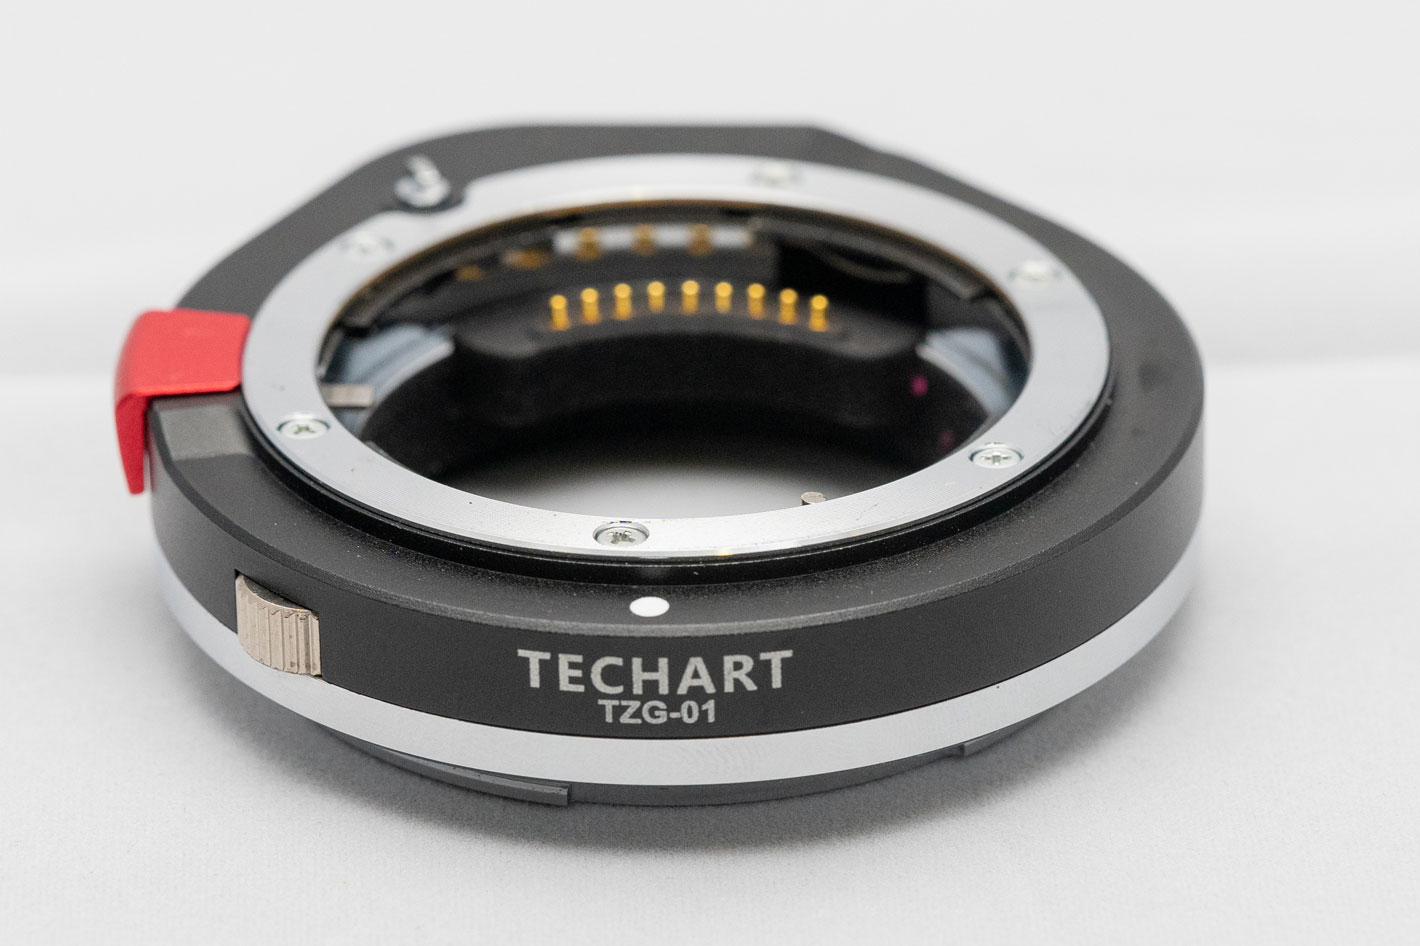 Techart’s new AF adapter: use Contax G lenses with Nikon Z cameras